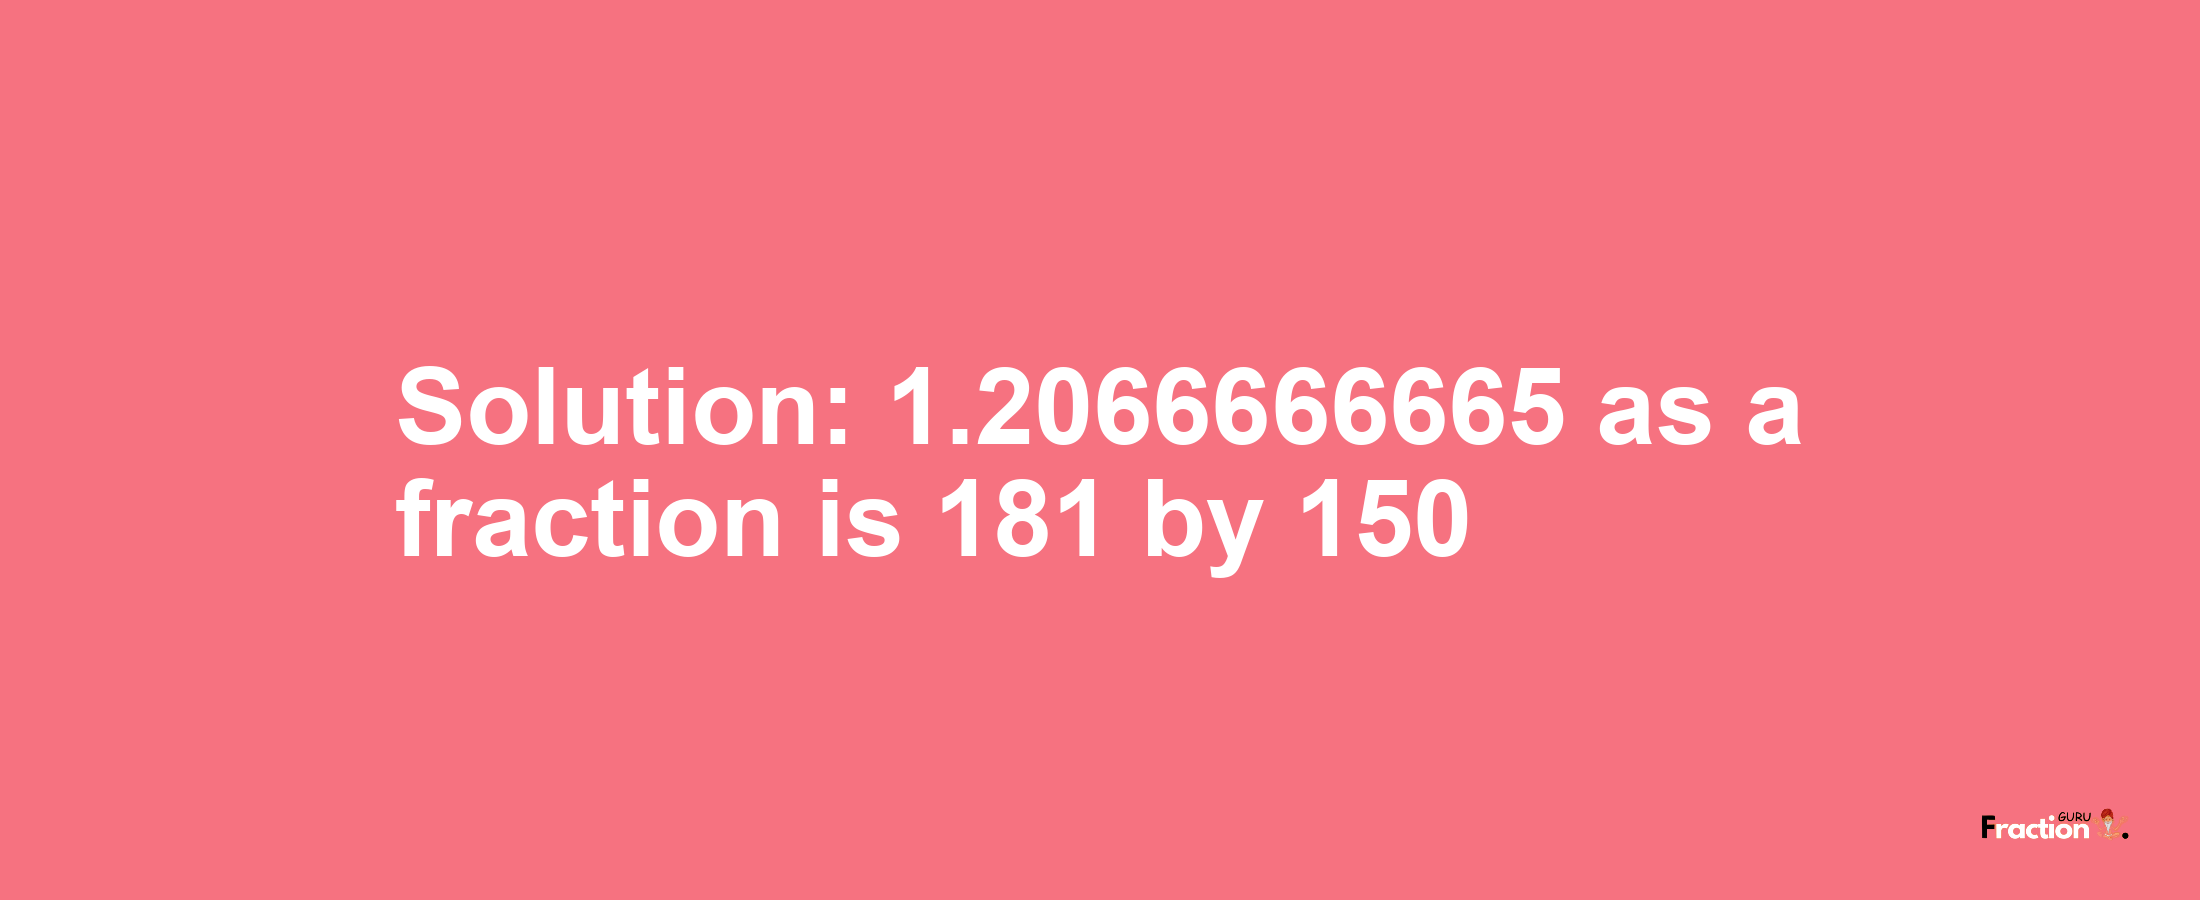 Solution:1.2066666665 as a fraction is 181/150